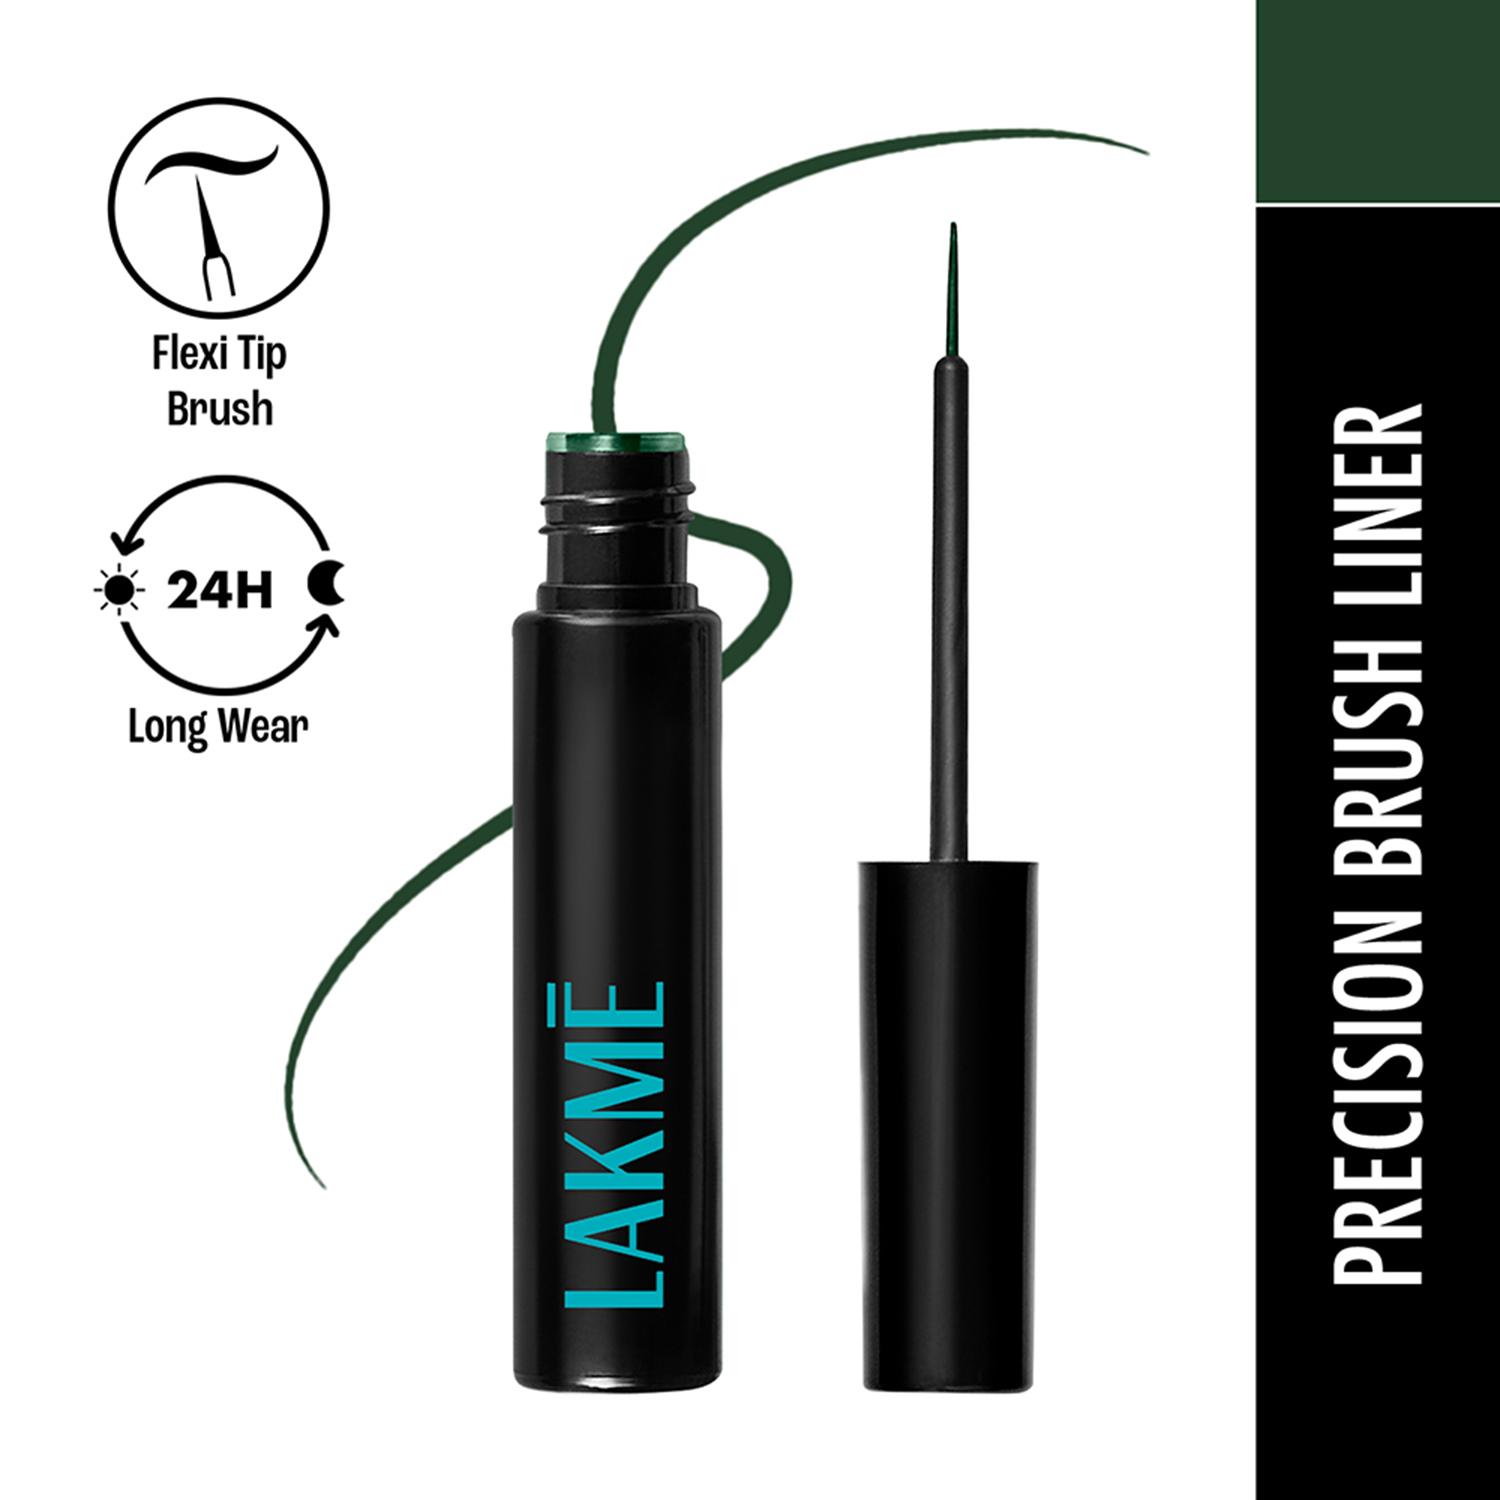 Lakme | Lakme 9 to 5 Eyeconic Liquid Eyeliner Matte Finish Waterproof Smudgeproof 24 Hrs Green (4.5 ml)